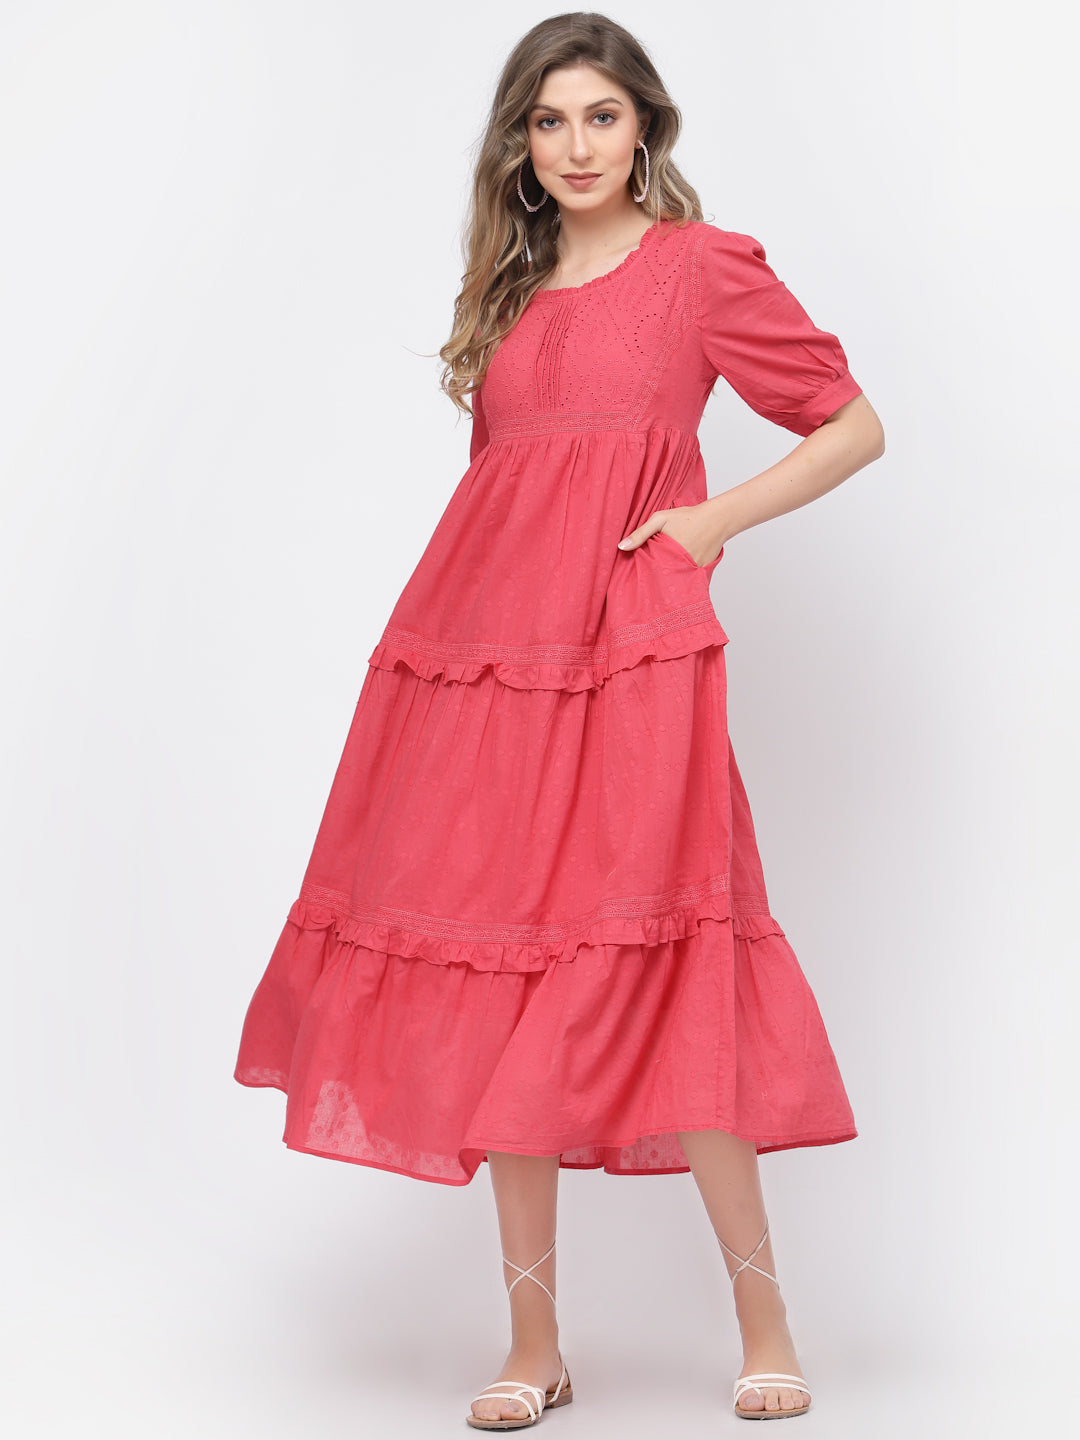 Terquois Self-Design Pink Casual Dress with Ruffled-Neck,Gathers and Emblished with Lace Dresses TERQUOIS   